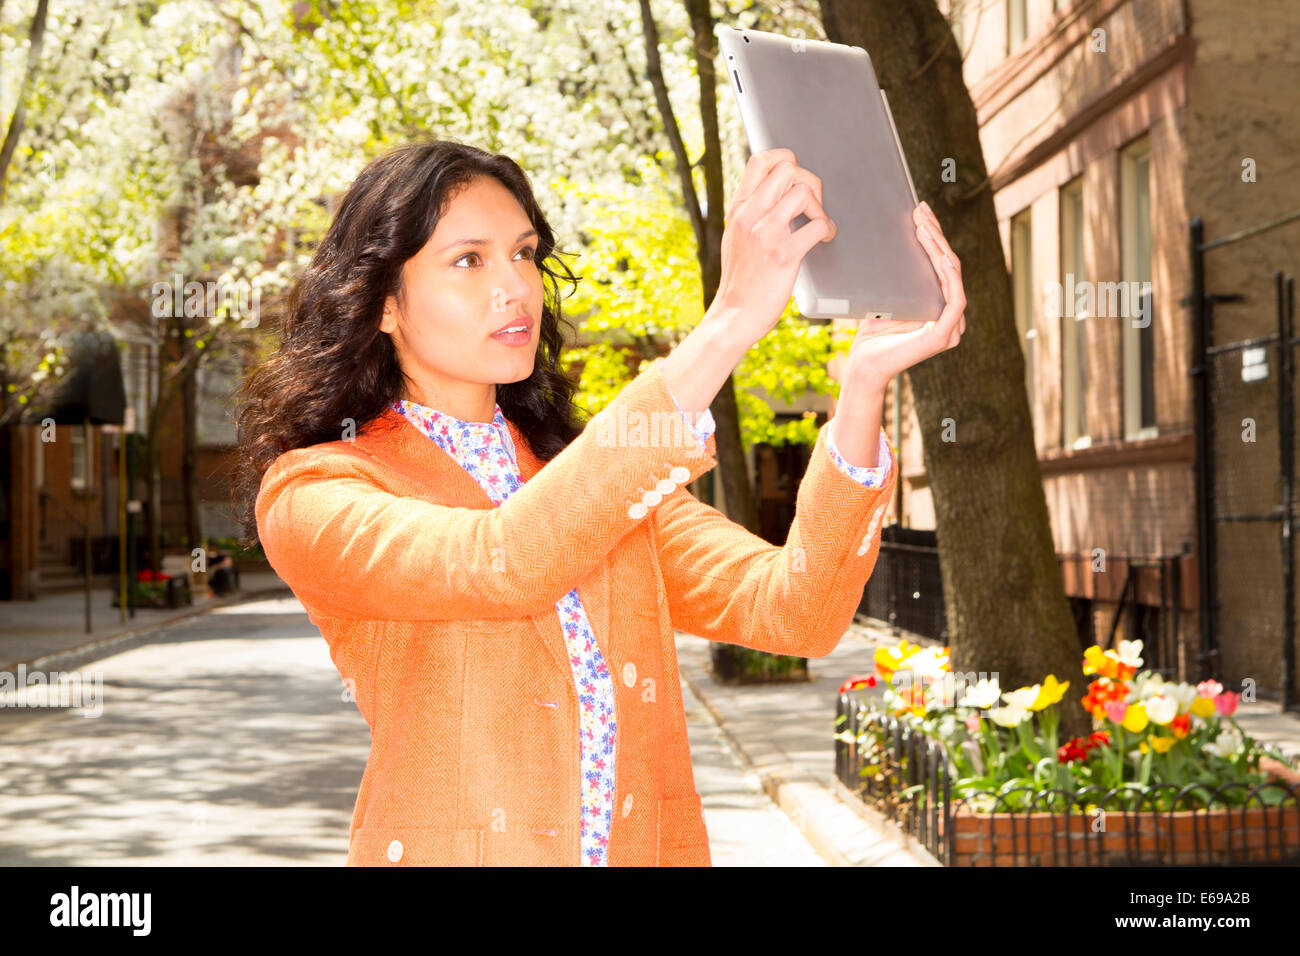 Mixed race woman taking picture with tablet computer on city street Stock Photo